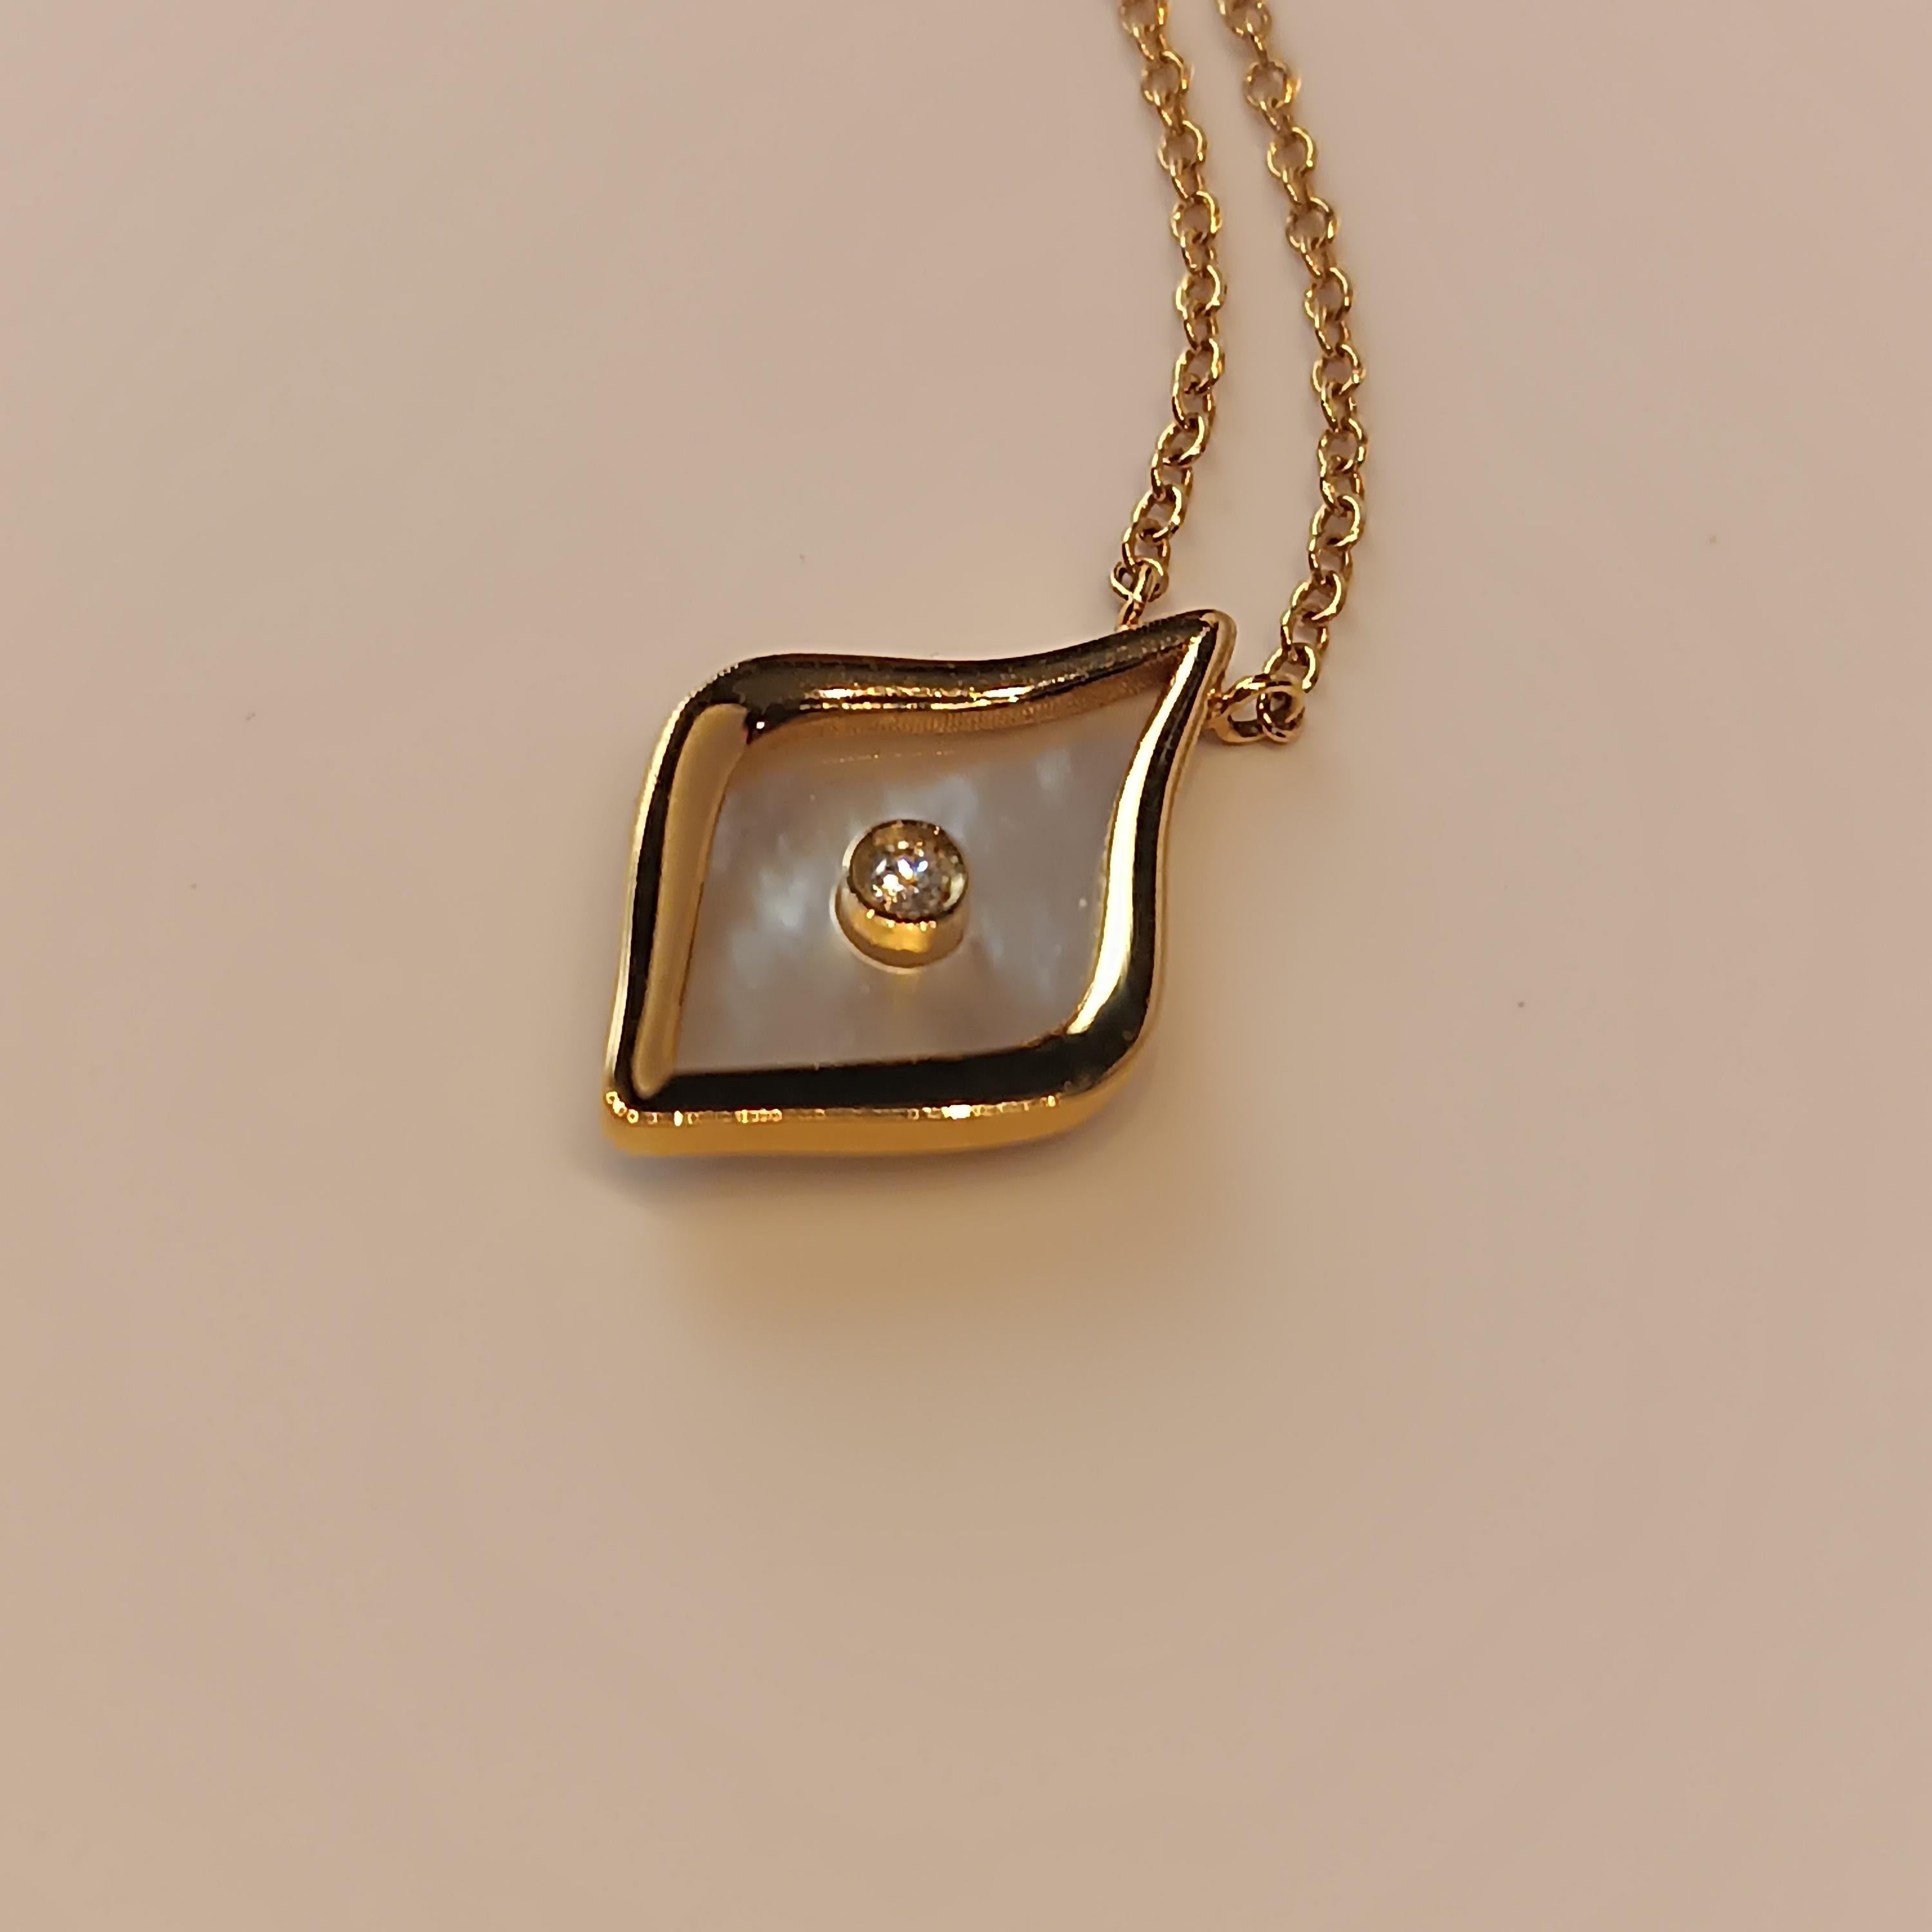 This wonderful Leo Milano pendant from our Olmetto collection shows in every detail a very complicate yet perfectly done workmanship. The pendant and the chain are in 18 white gold with mother of pearl . The object weights 4.71 grams the  diamonds